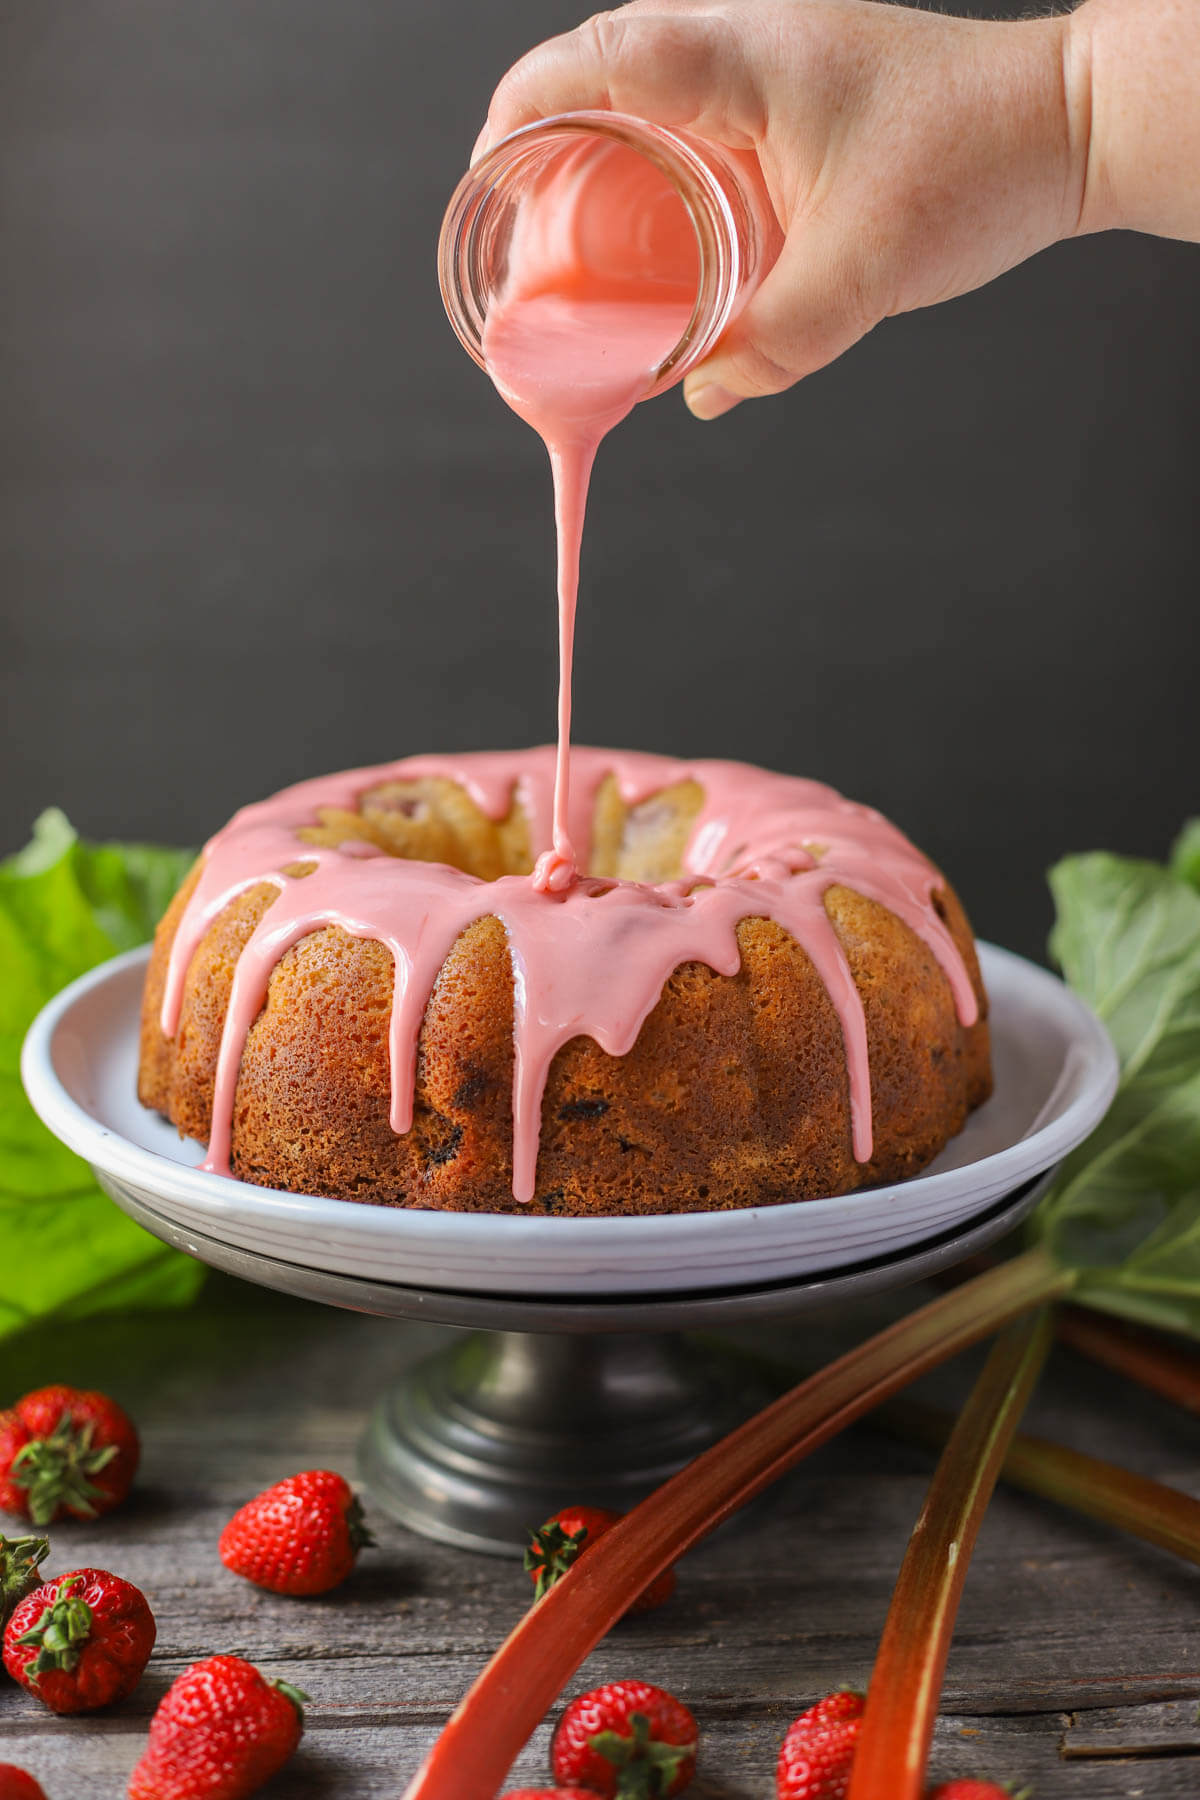 A hand pours pink glaze out of a jar over a golden baked bundt cake.